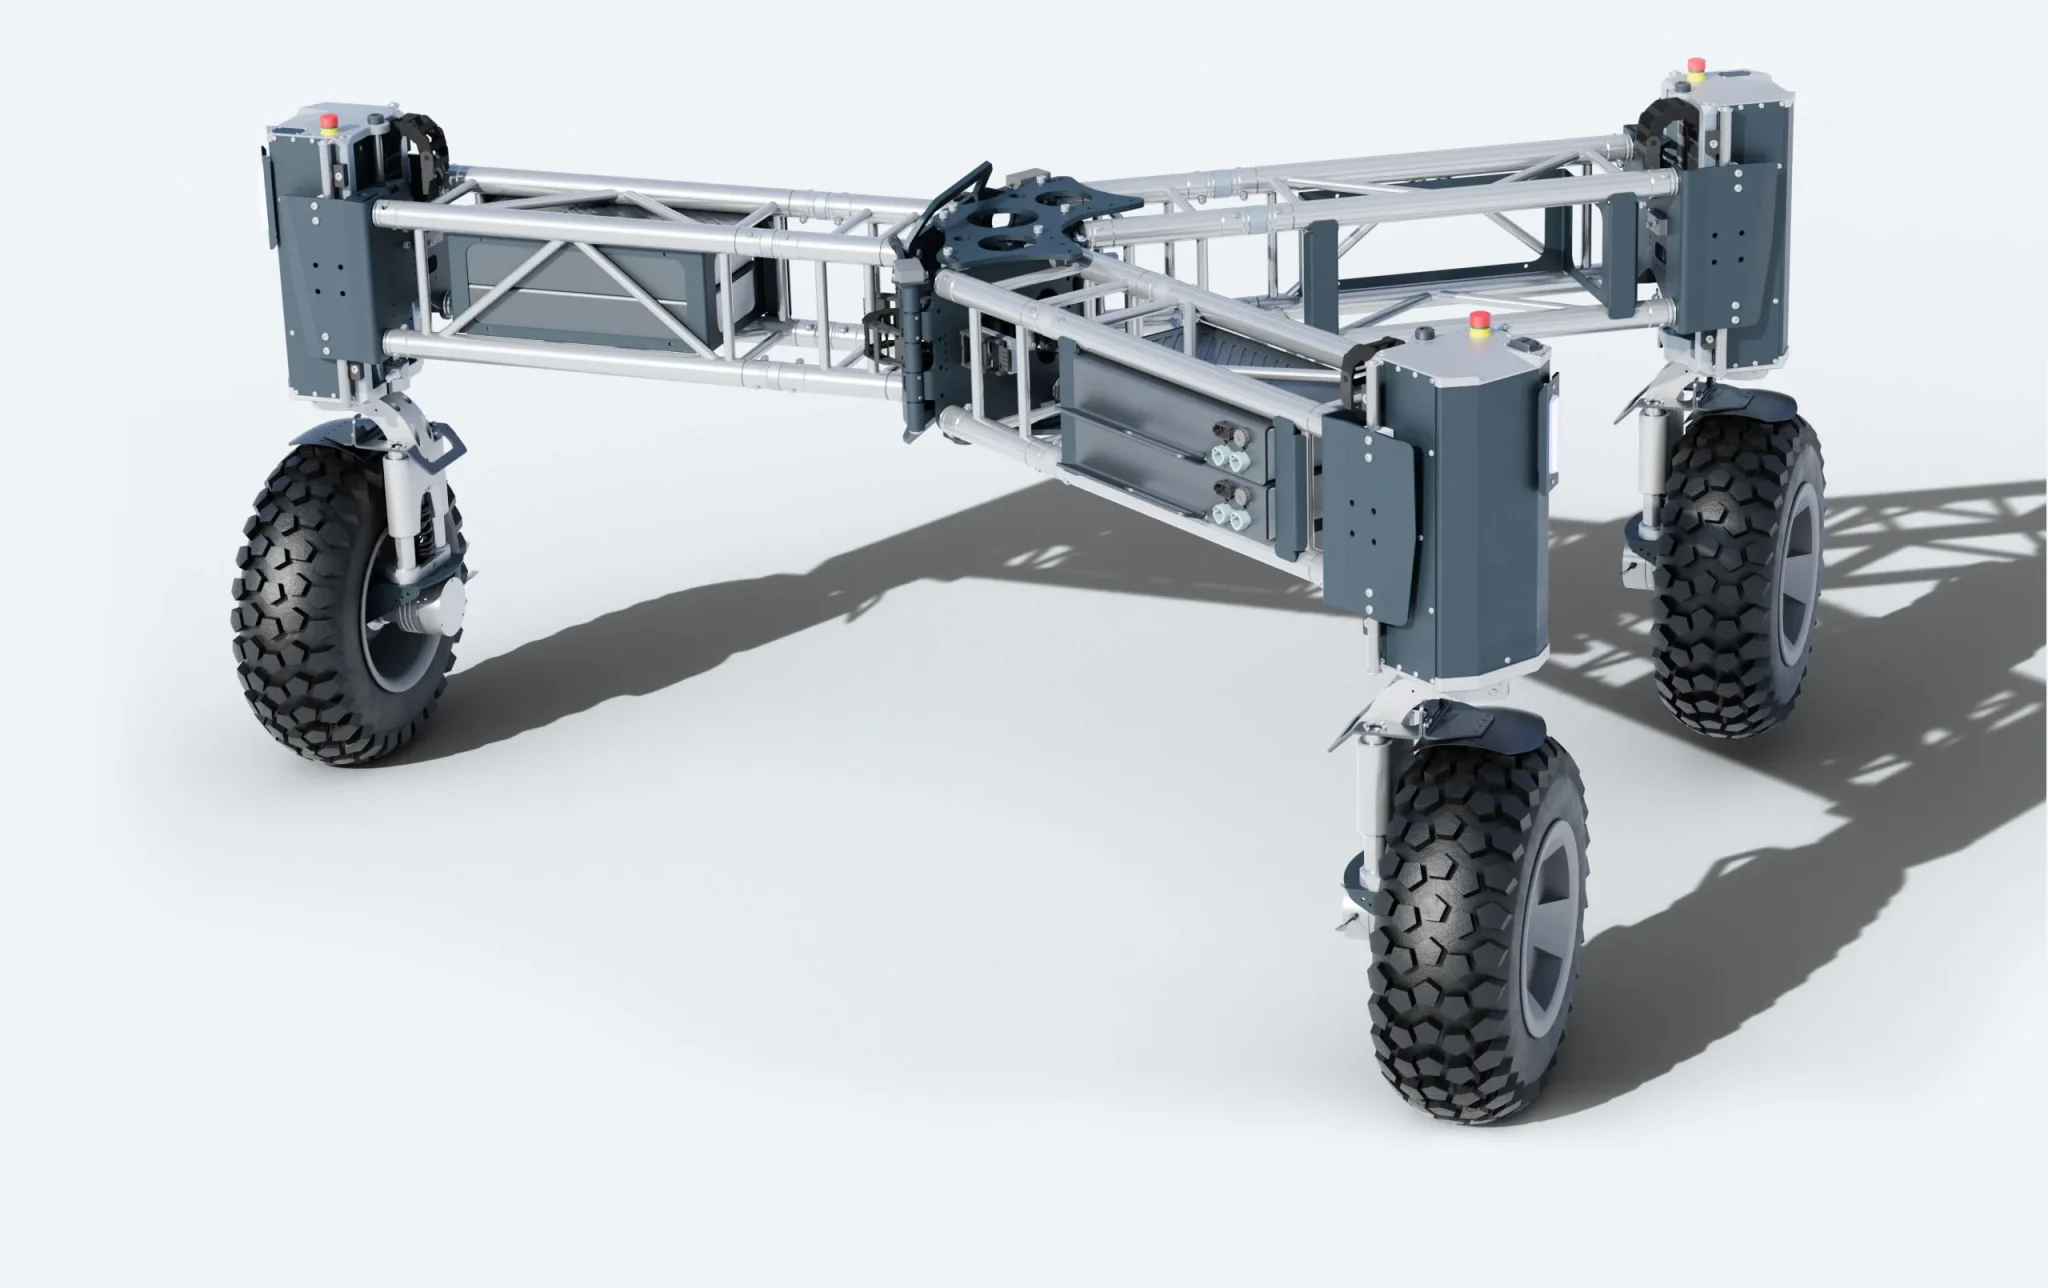 We build an autonomous agricultural robot, designed to advance sustainable agriculture on a large scale.